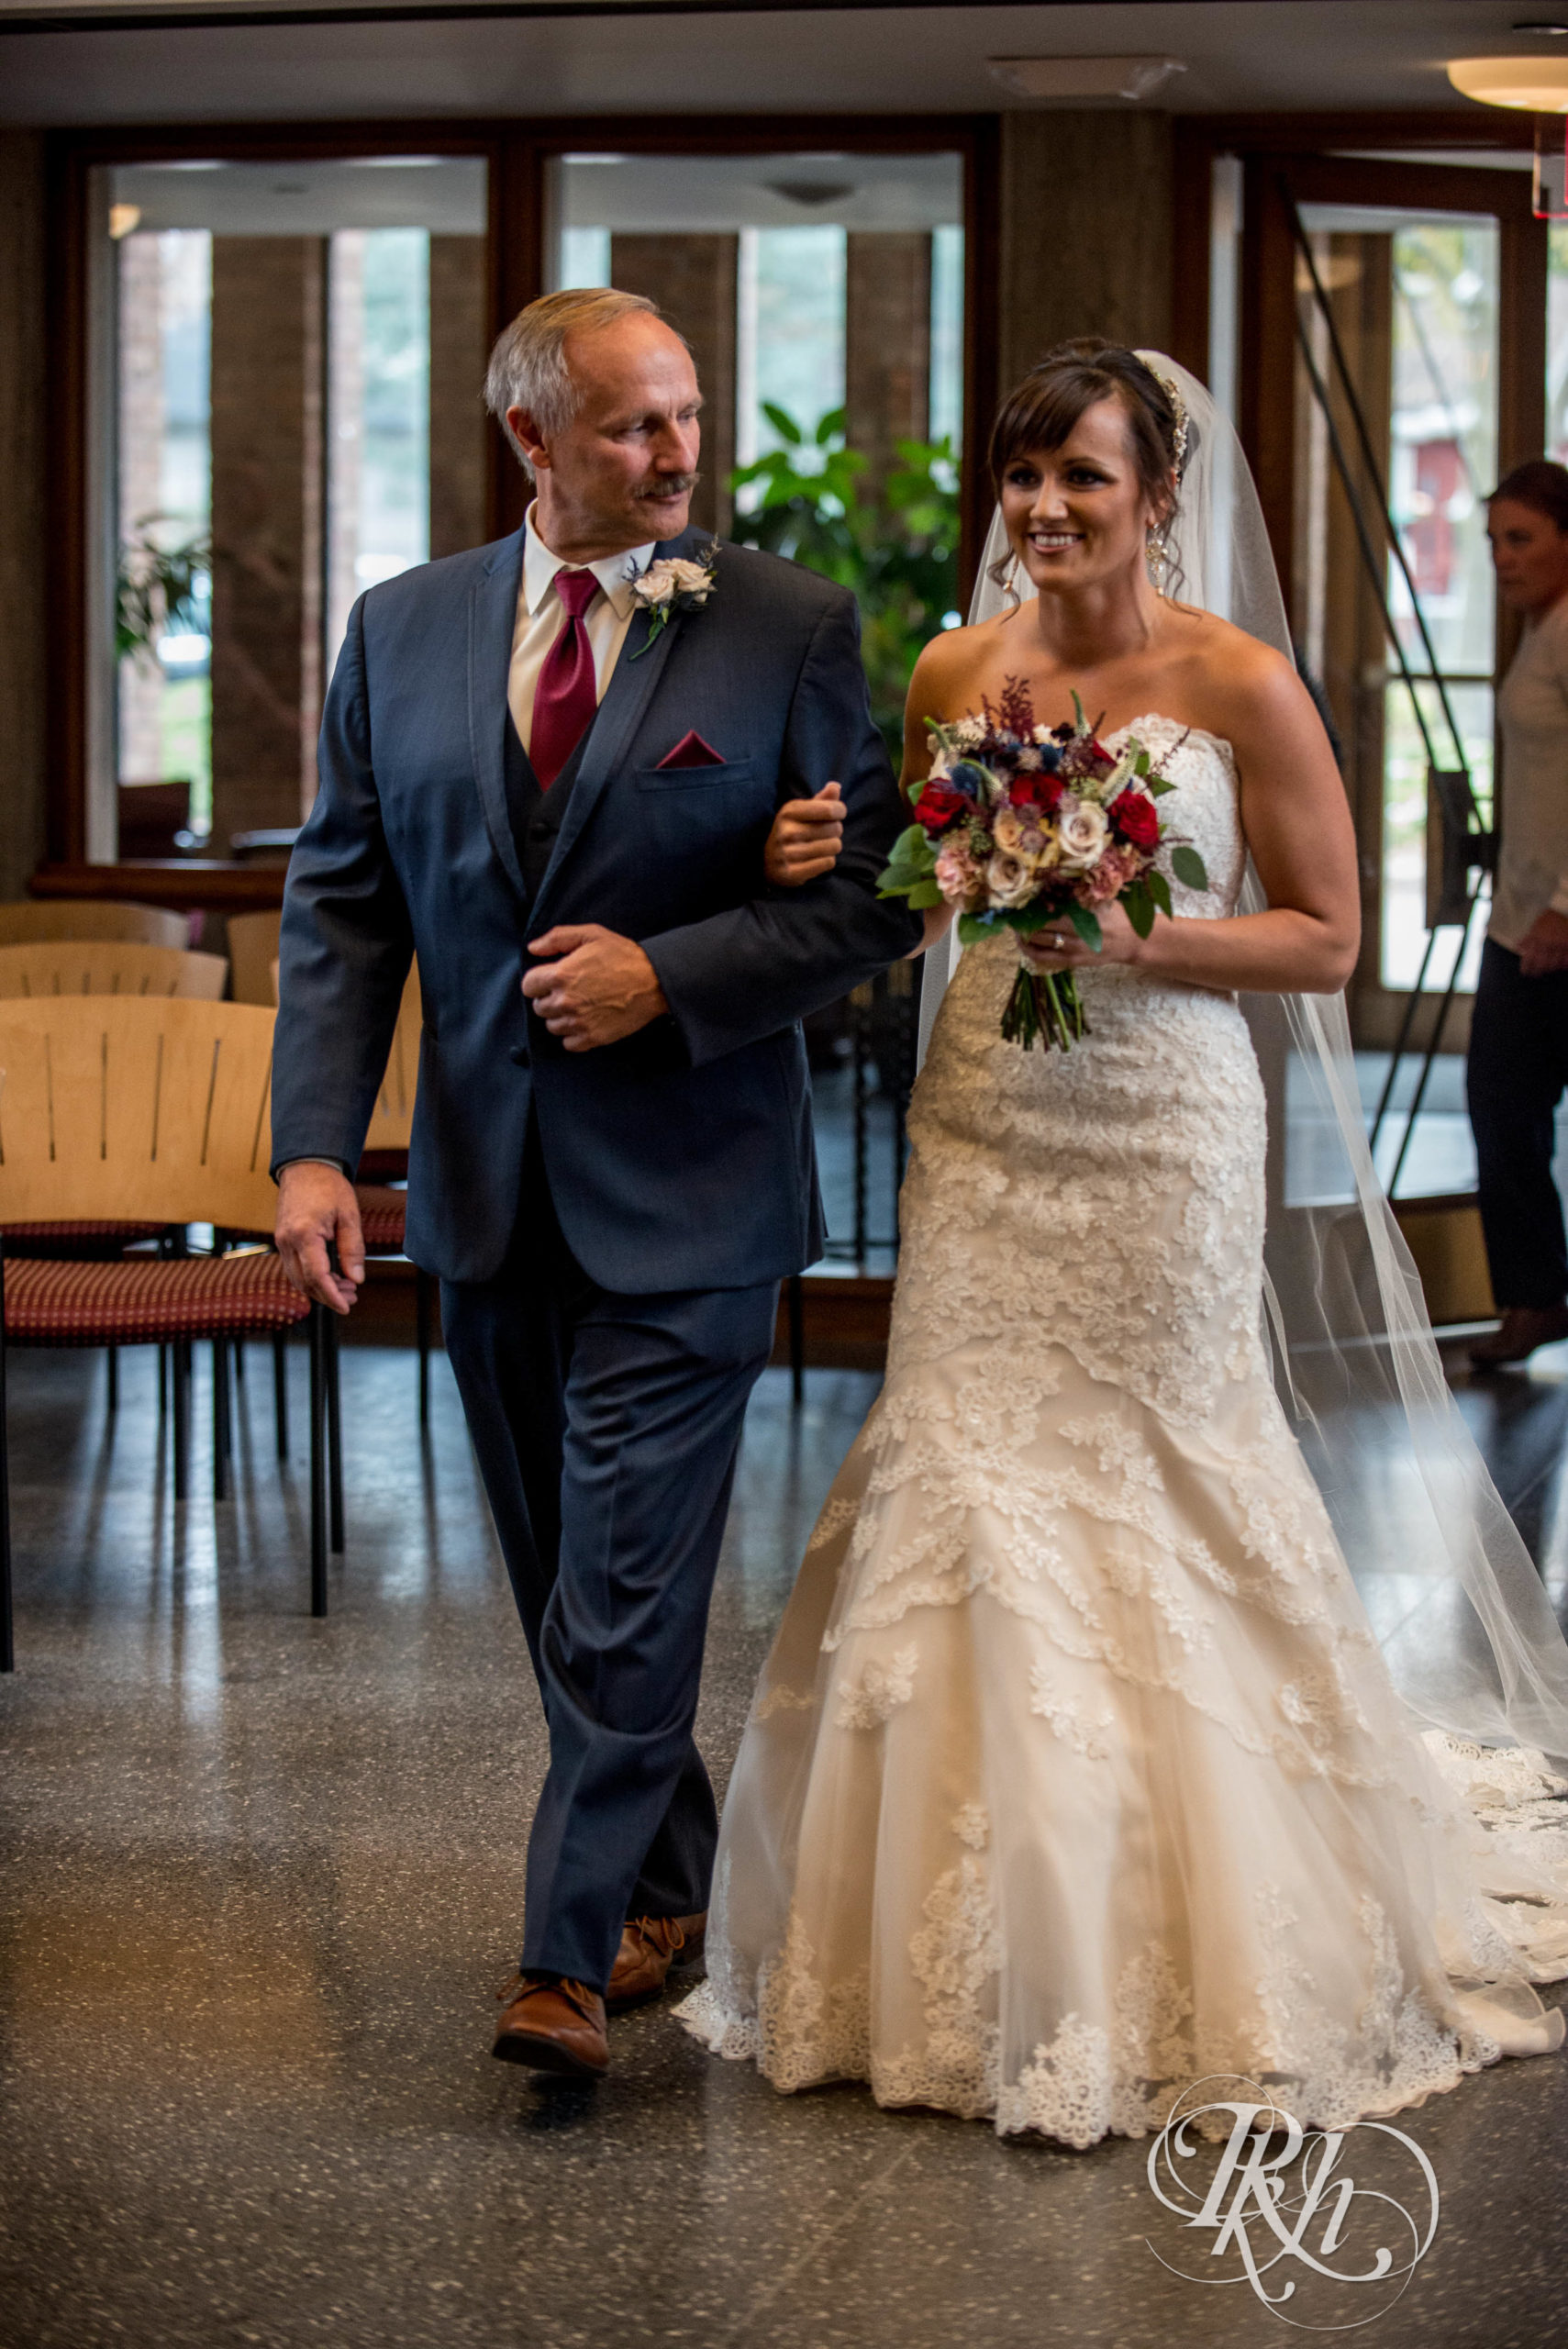 Bride and dad walk down the aisle at wedding ceremony in Minneapolis, Minnesota.